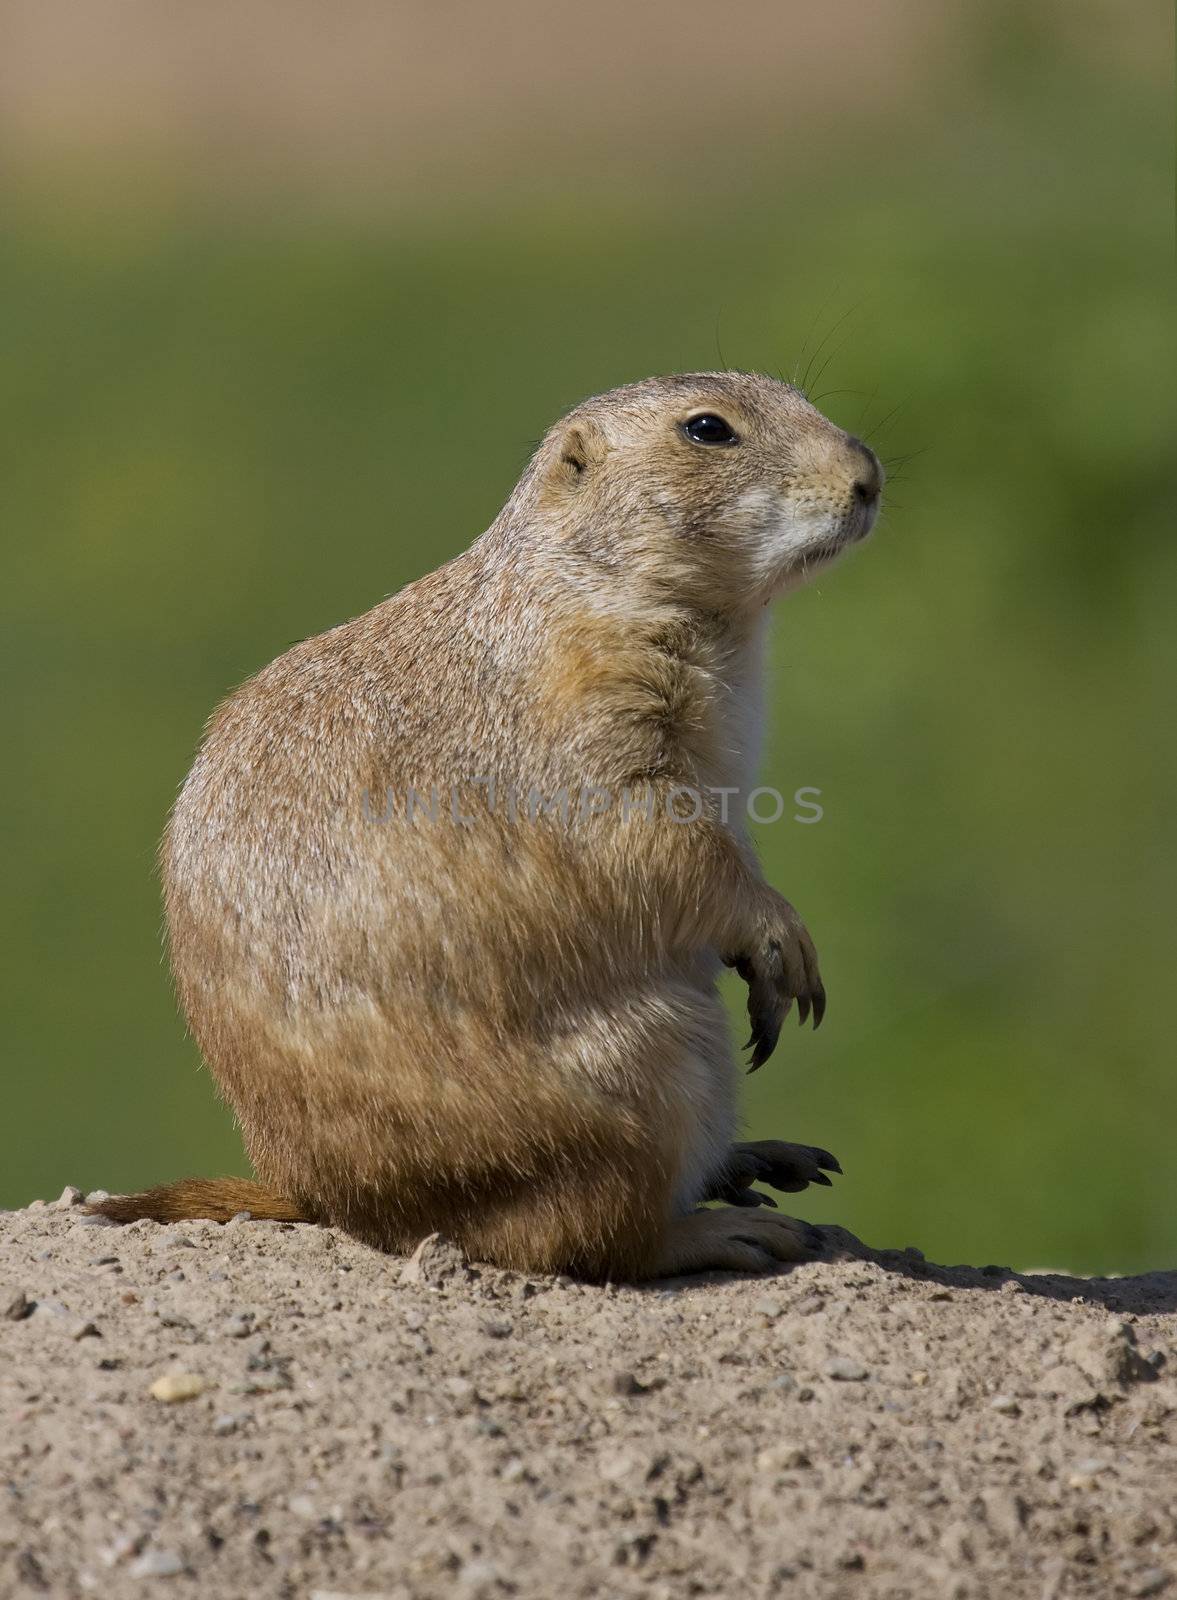 Prairie Dog sits and watches at full alert.